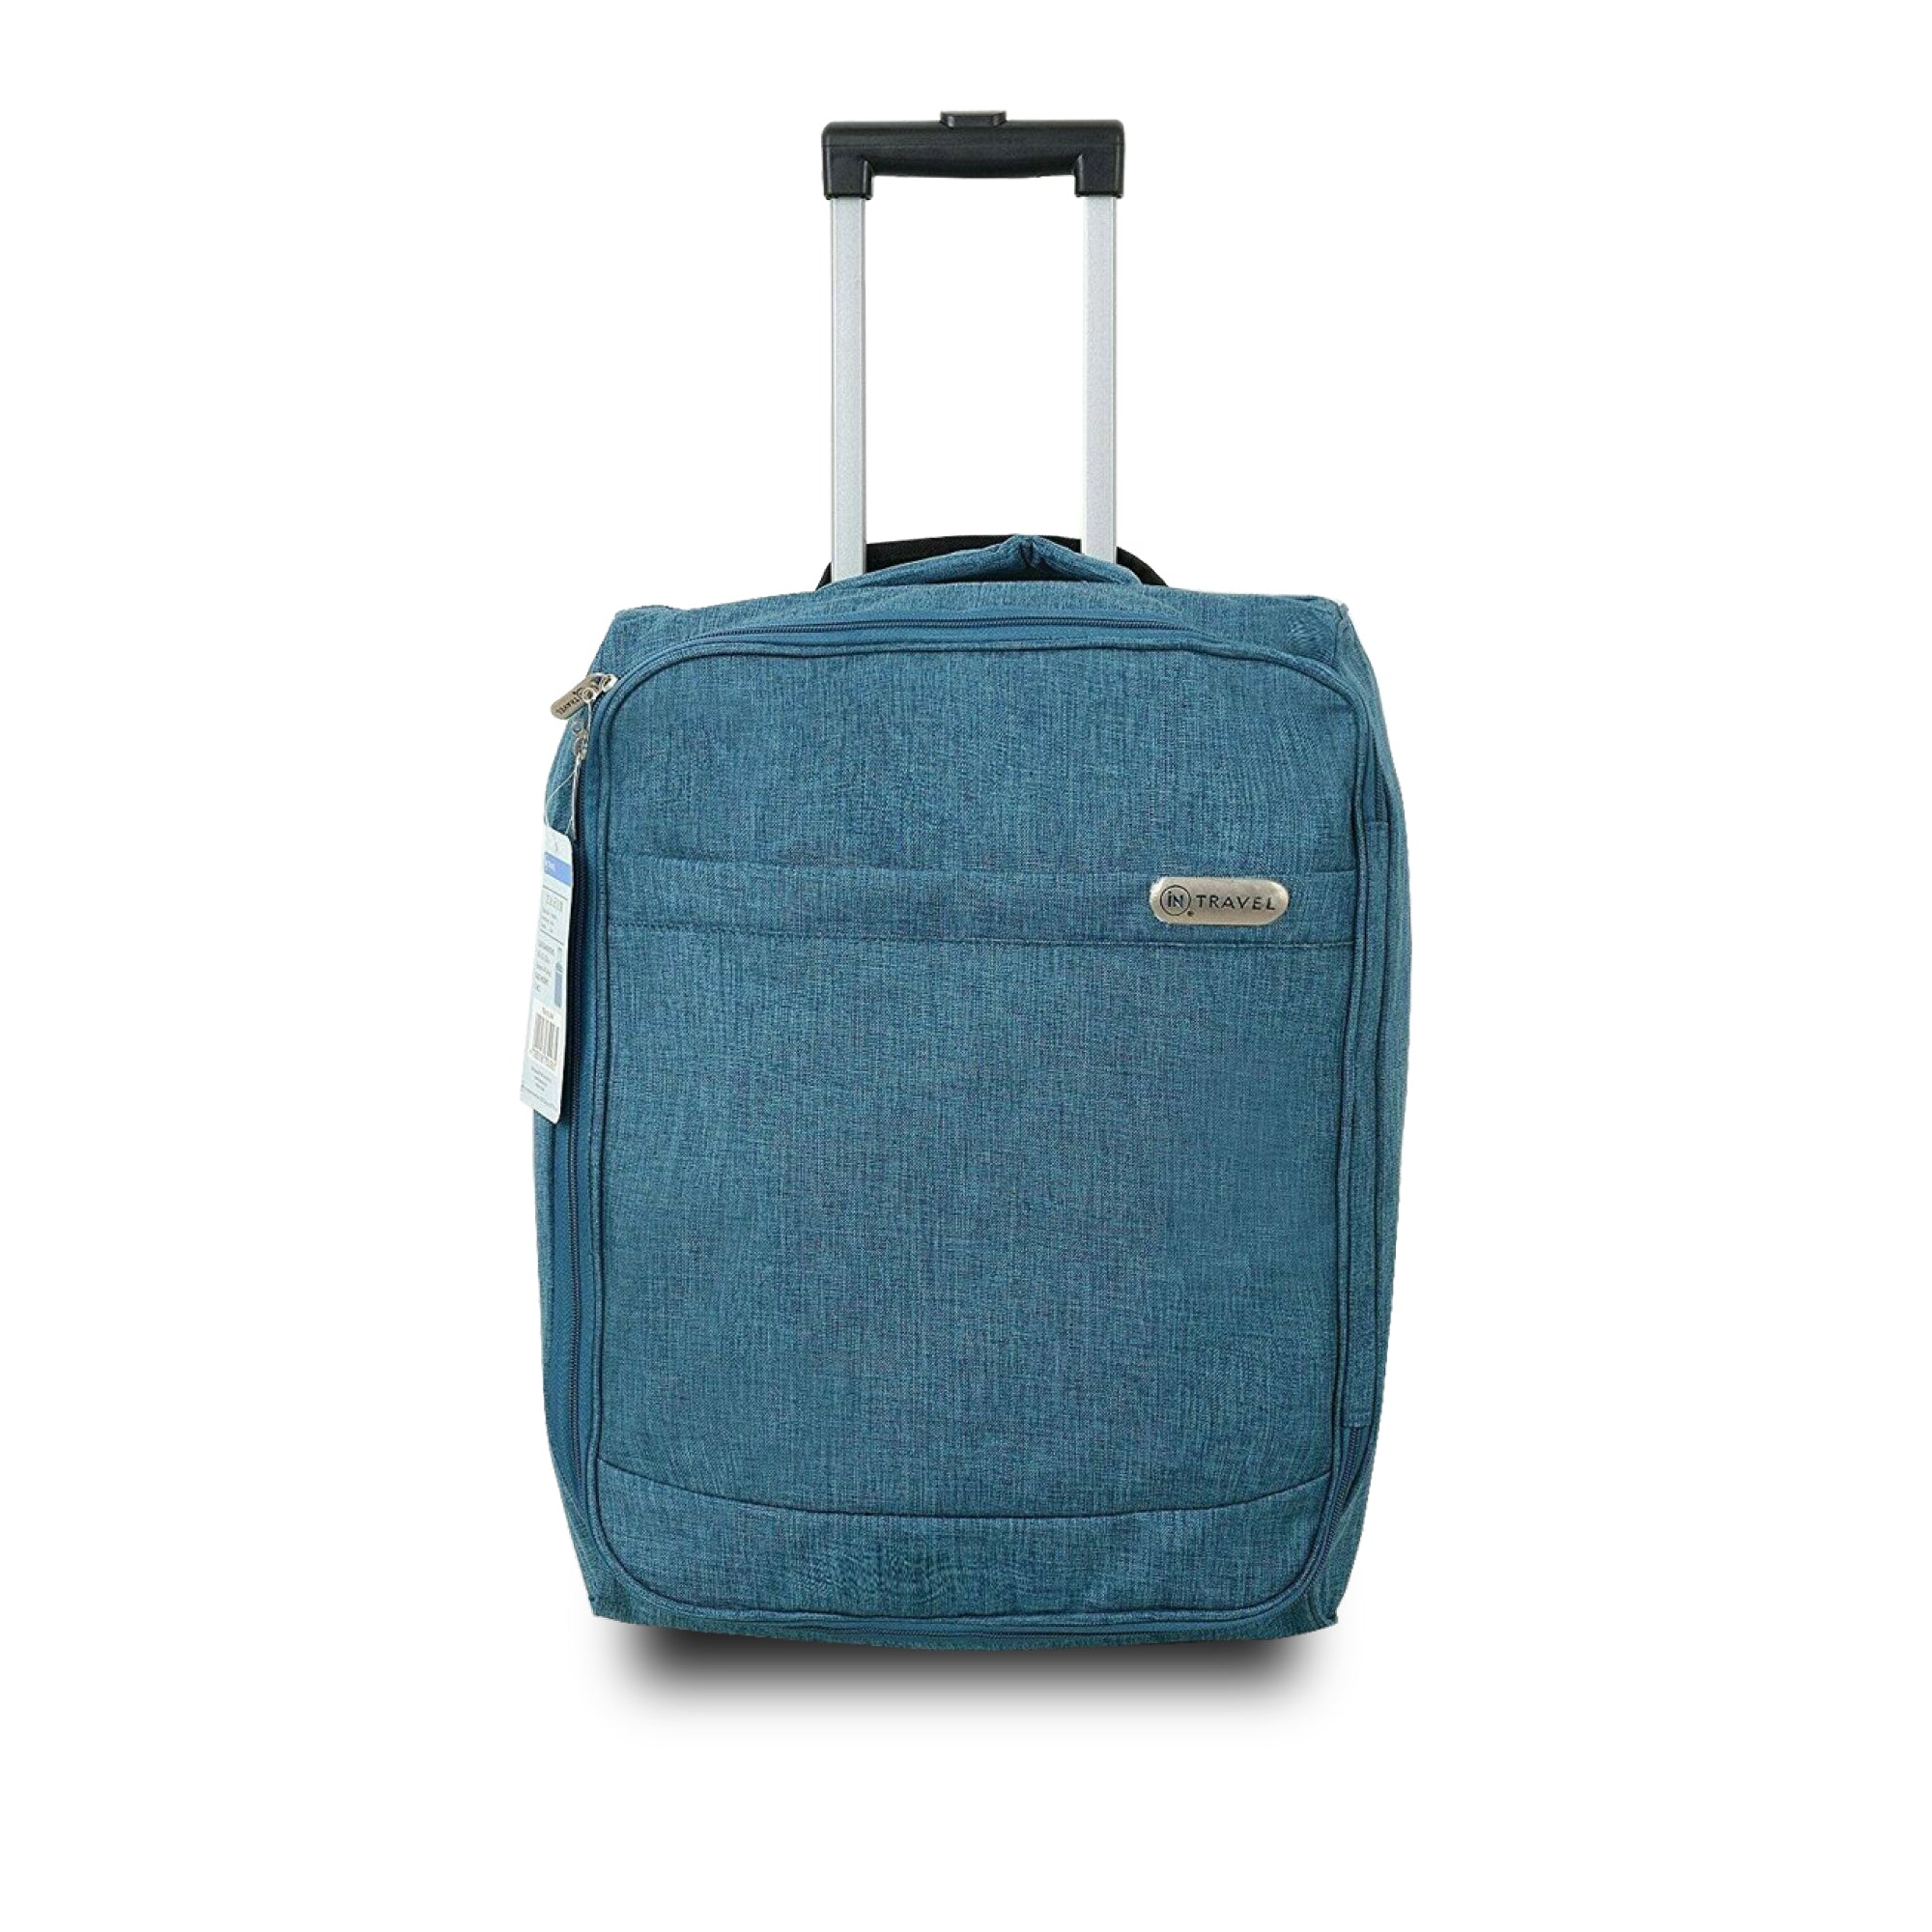 Travel Luggage Trolley with Extendable Handle on Wheels (Teal) - DSL